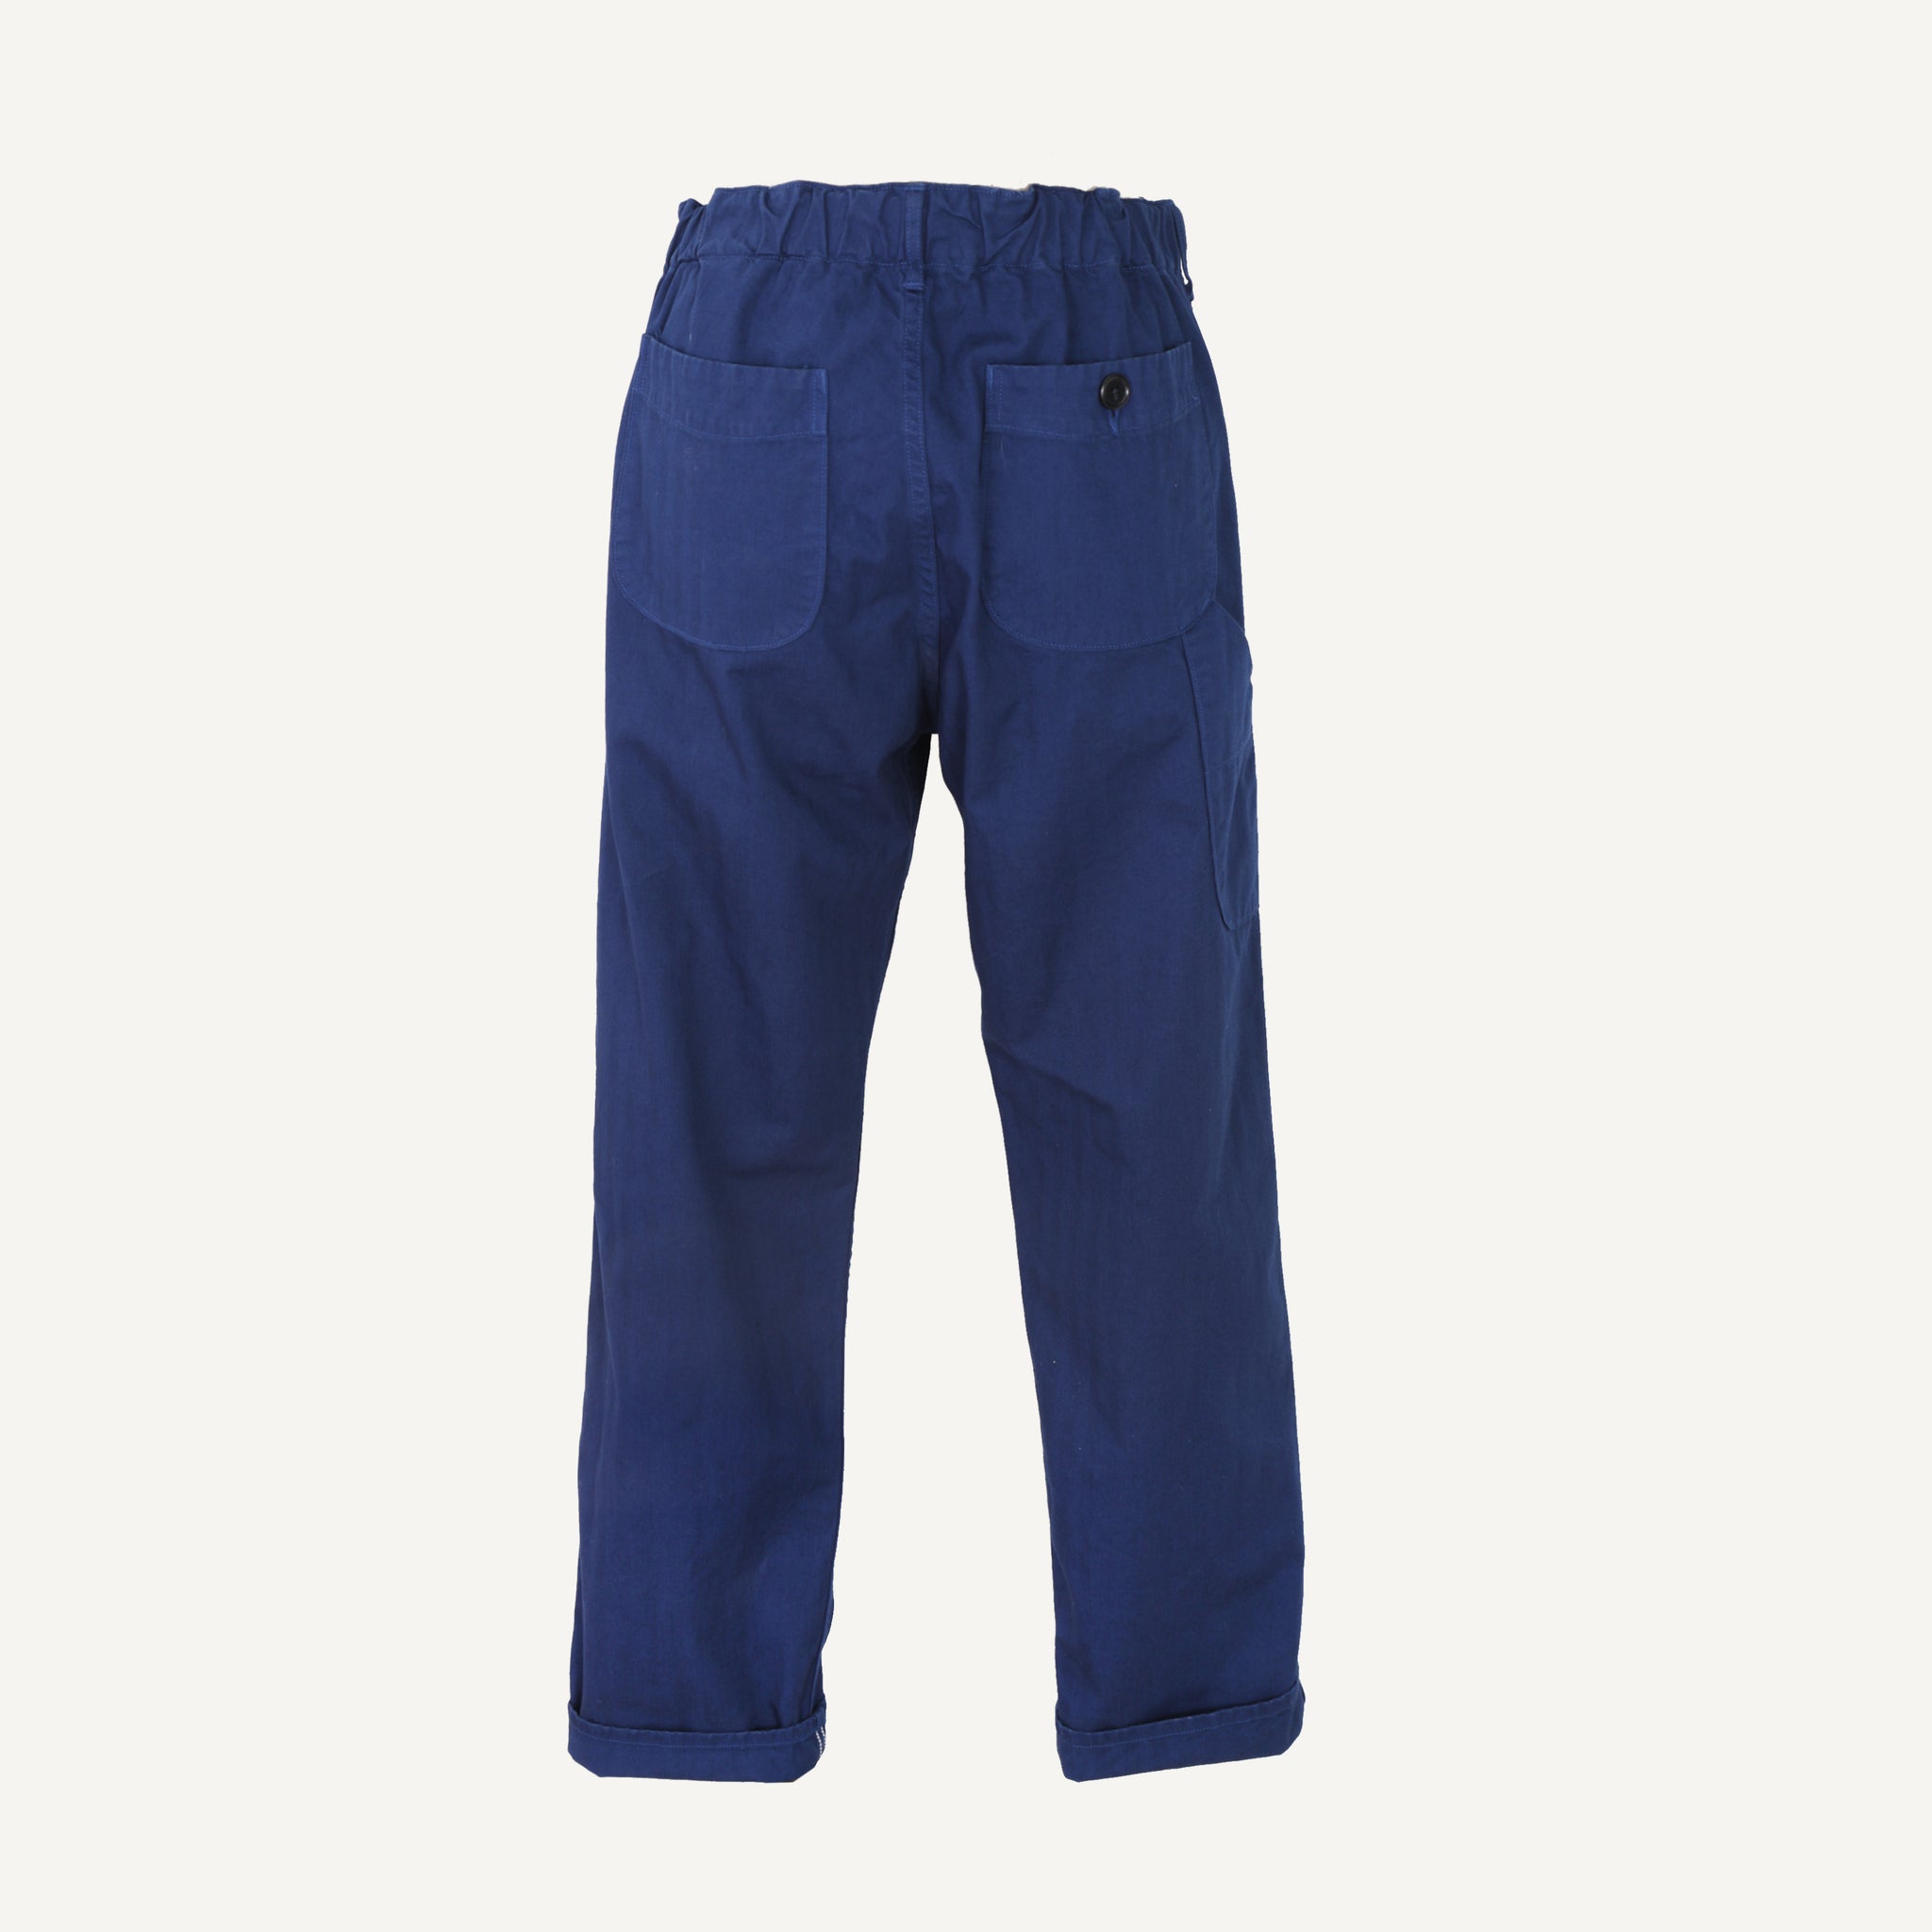 ORSLOW FRENCH WORK PANTS